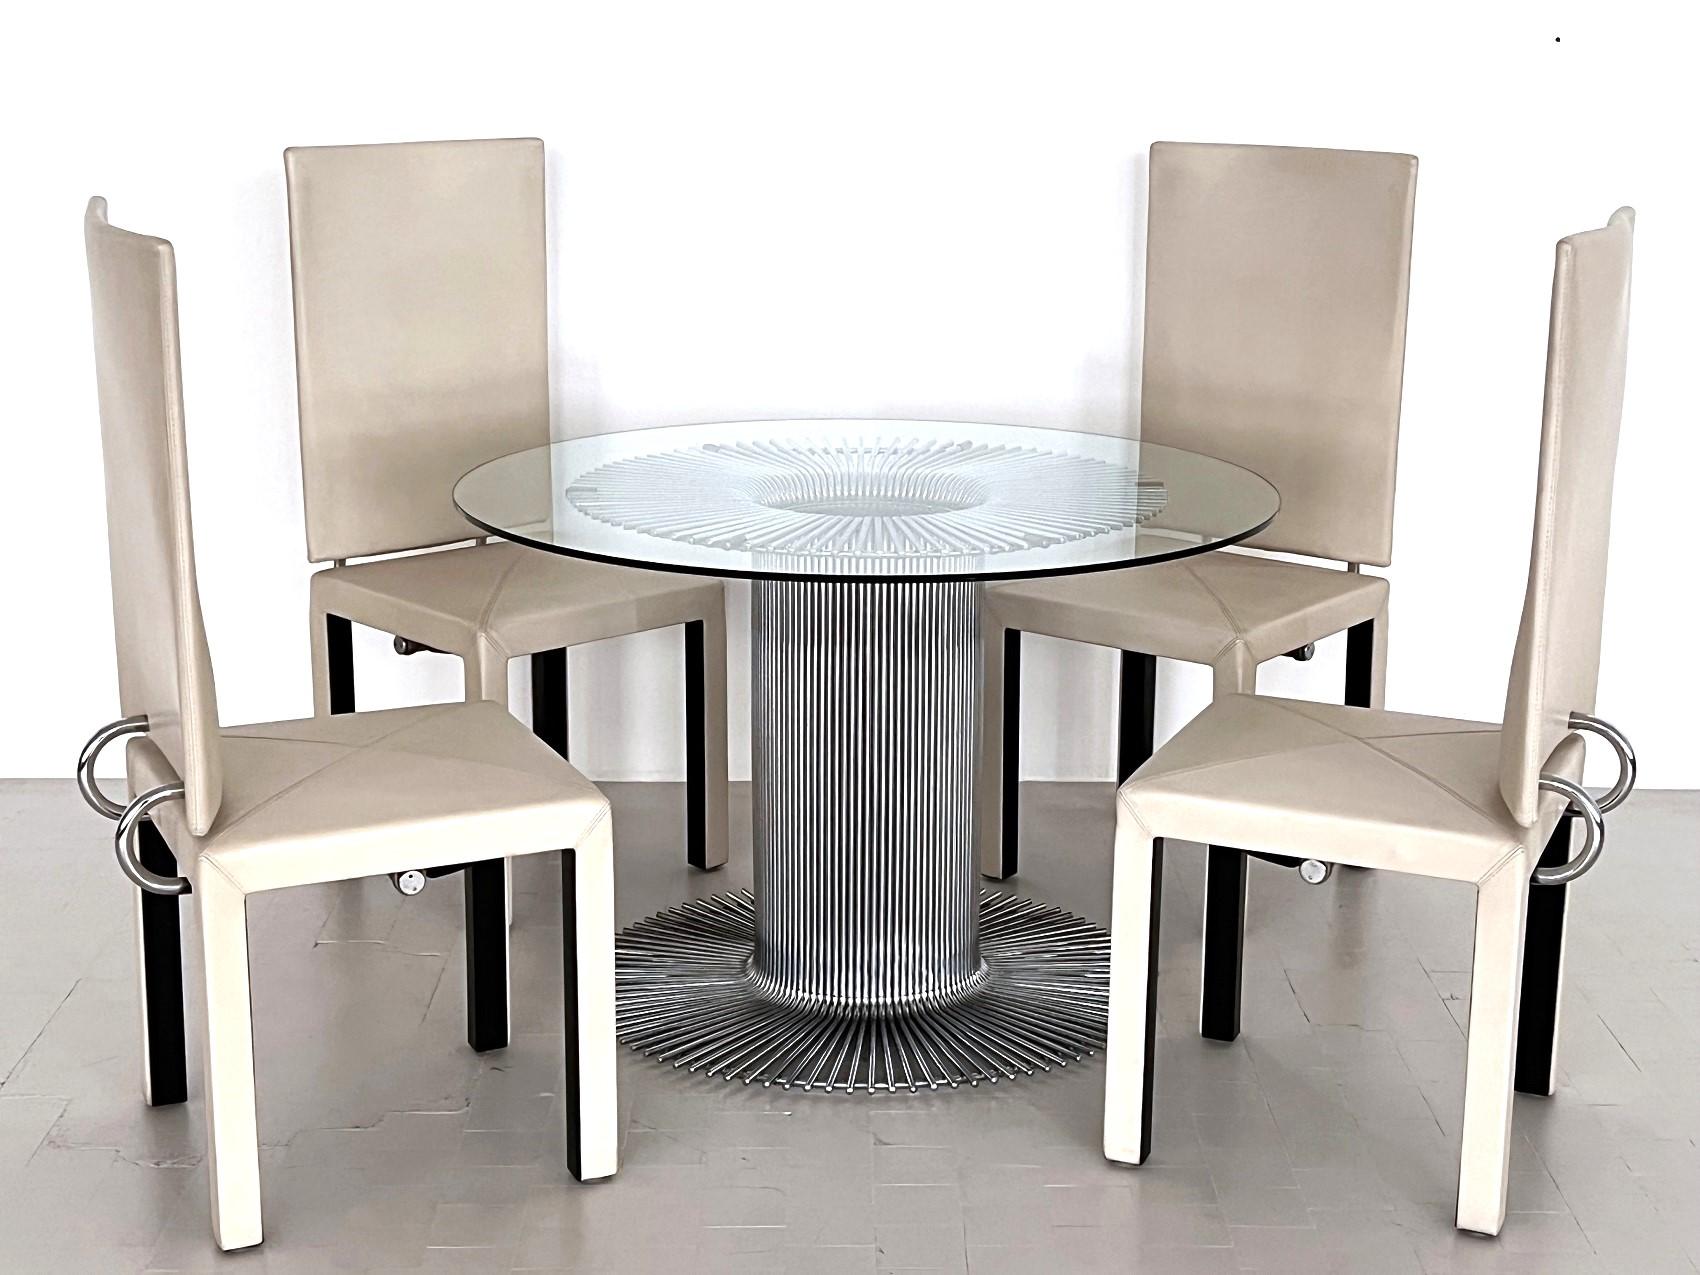 Beautiful round dining table made of chromed metal with glass top
Made in Italy,  ca. 1960s

Pedestal dining table with a sculptural tubular chrome base and clear glass top. 
Designed and Made in Italy. 
Particular design of the central base, with a